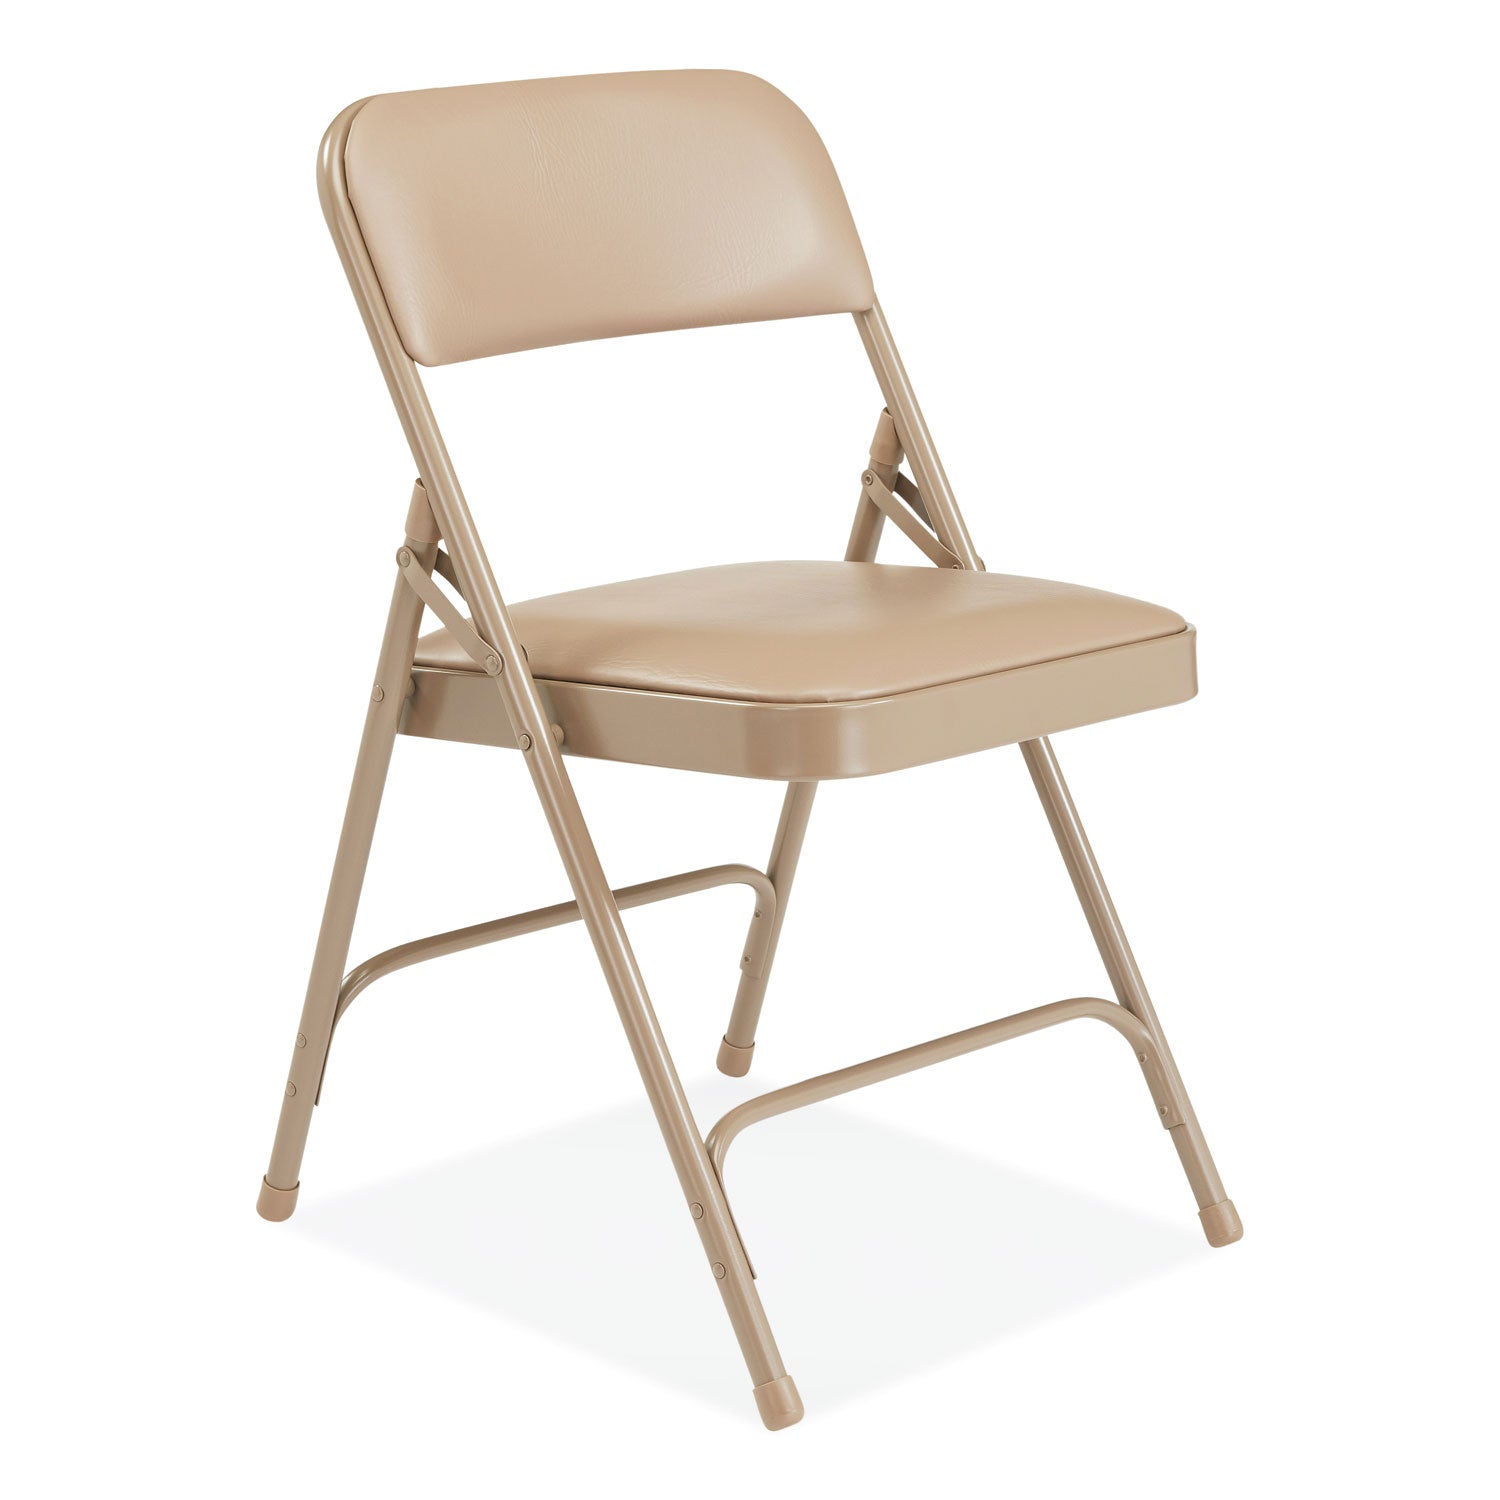 1200-series-premium-vinyl-dual-hinge-folding-chair-supports-500-lb-1775-seat-ht-french-beige-4-ctships-in-1-3-bus-days_nps1201 - 2